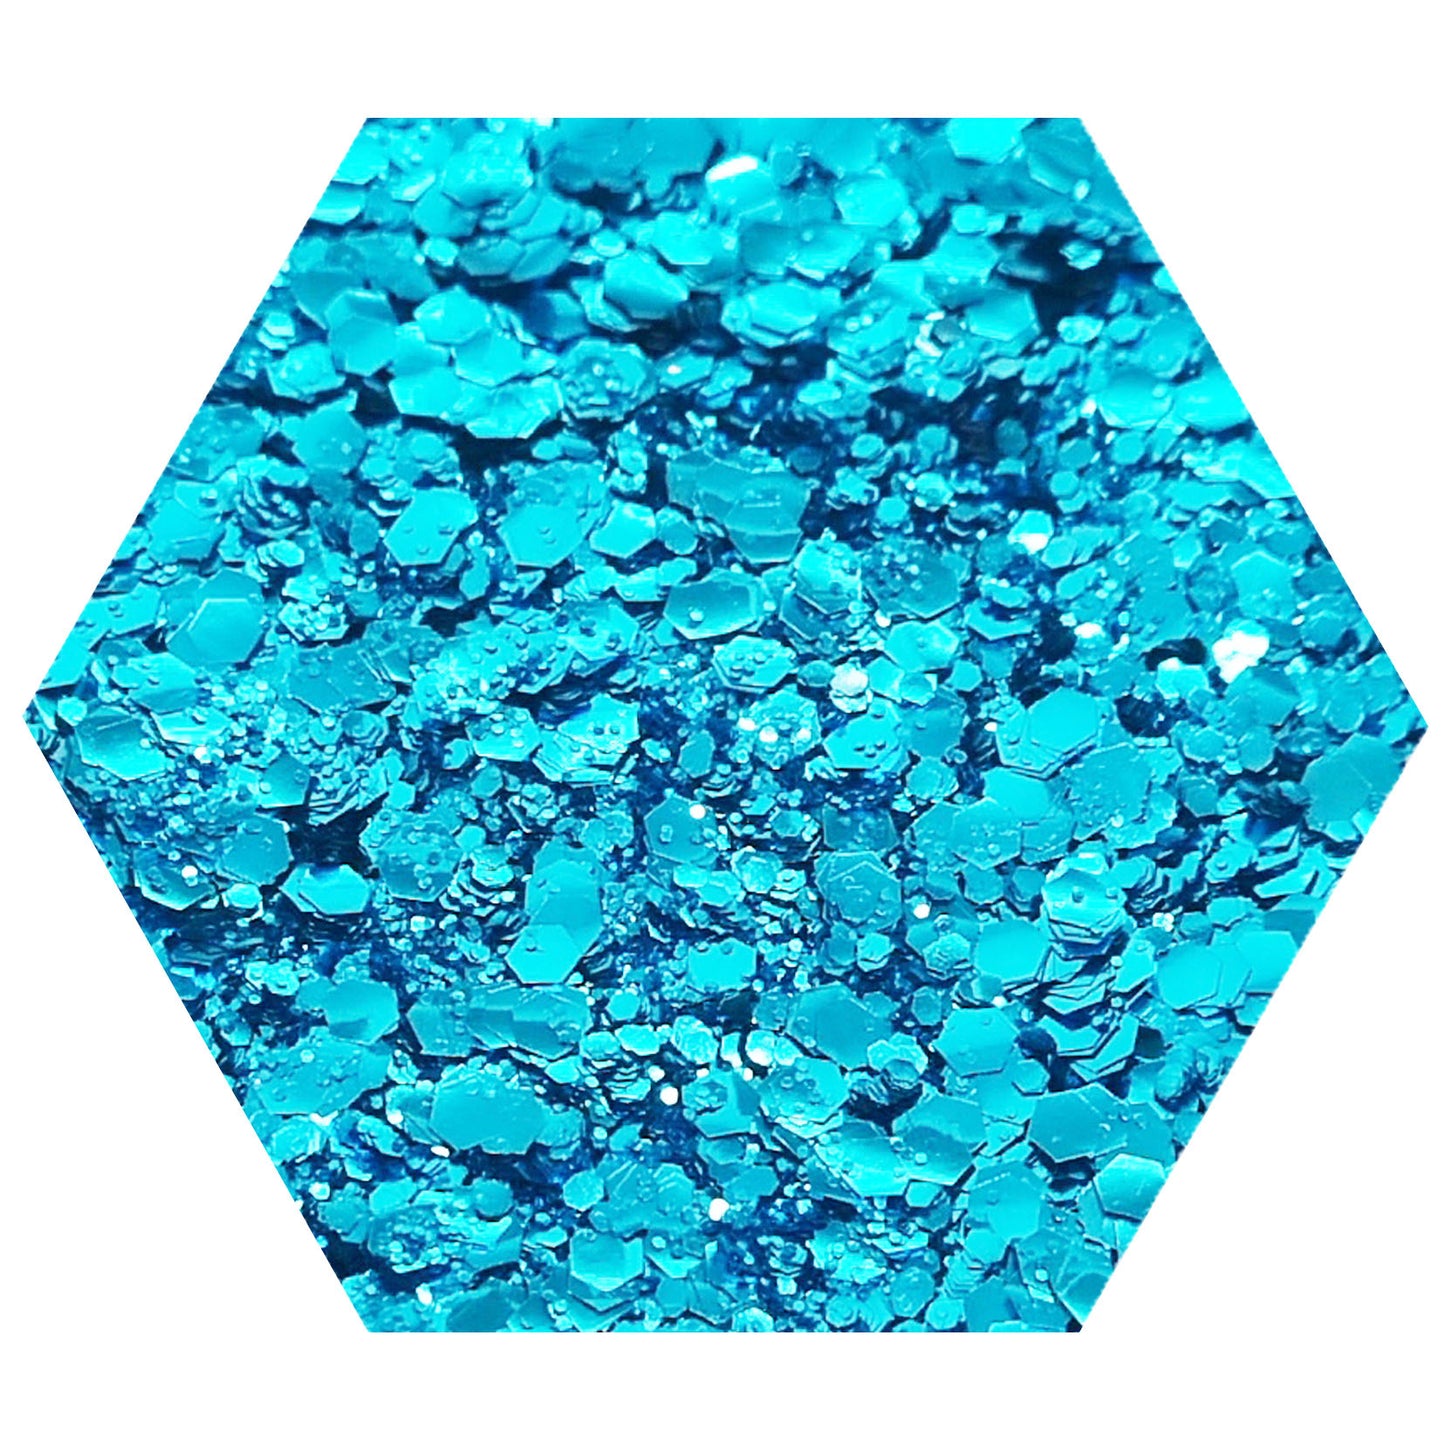 Sky Blue Biodegradable Cosmetic Glitter | Mix | Truly Personal | Wax Melt Bath Bombs Soap